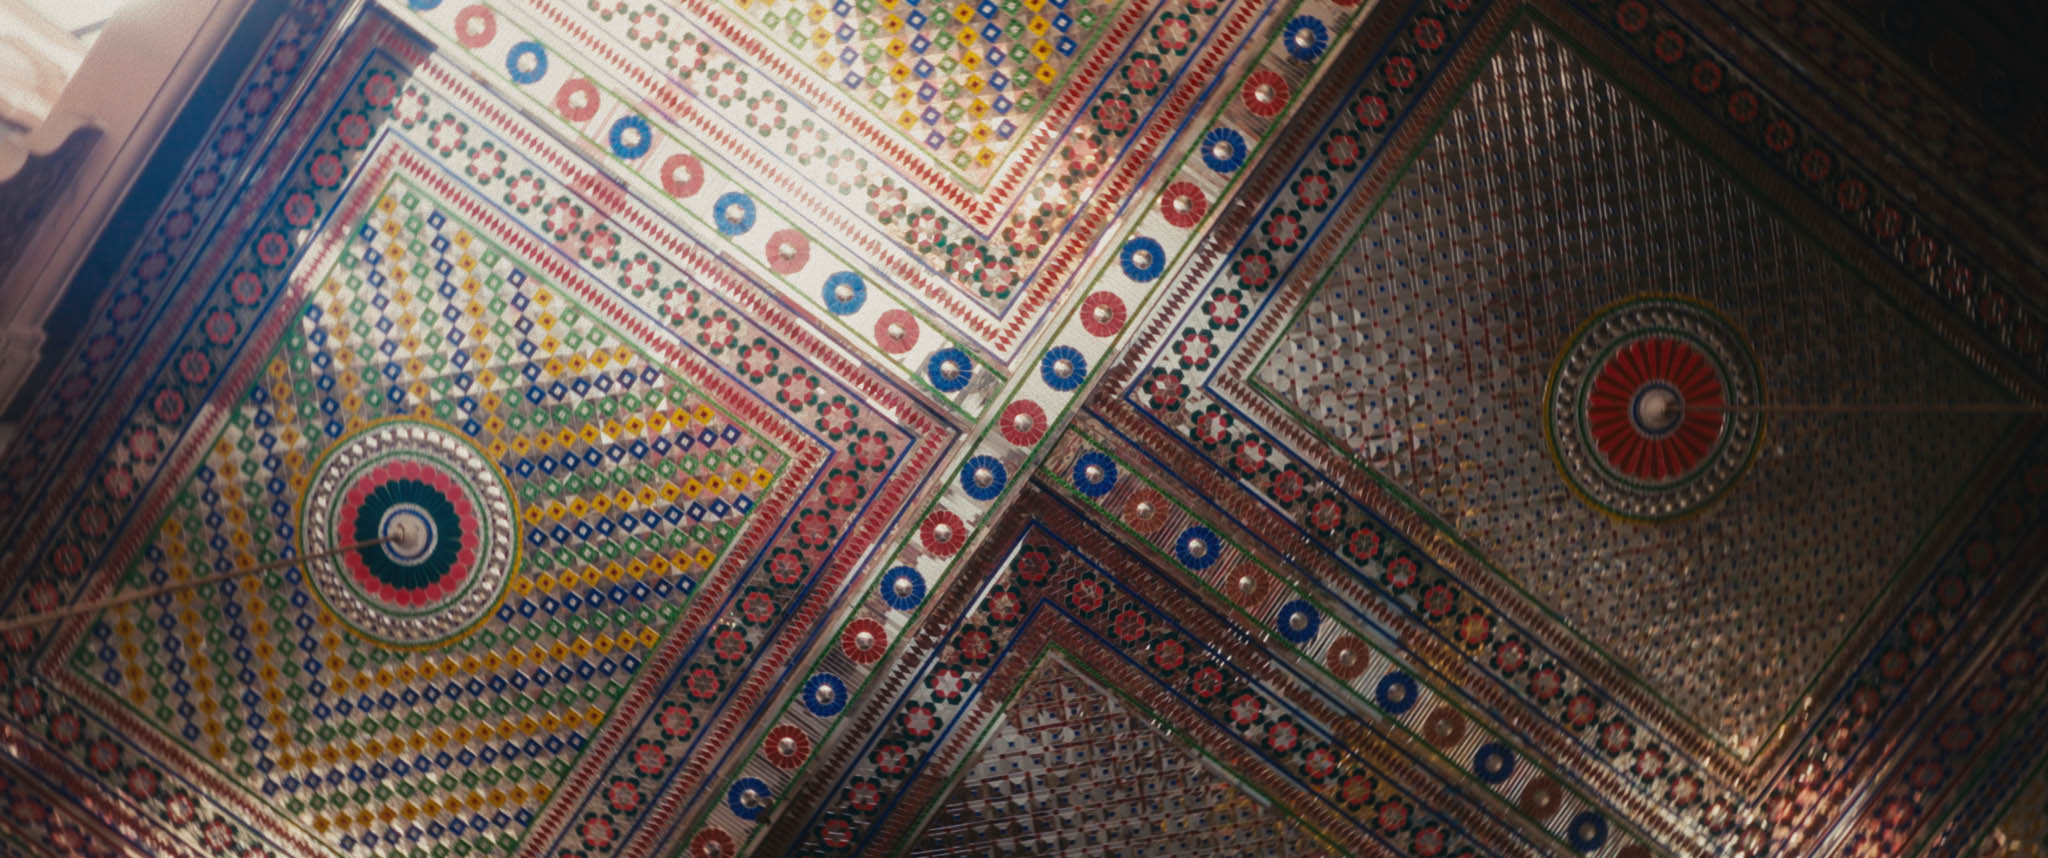 patterned Ceiling